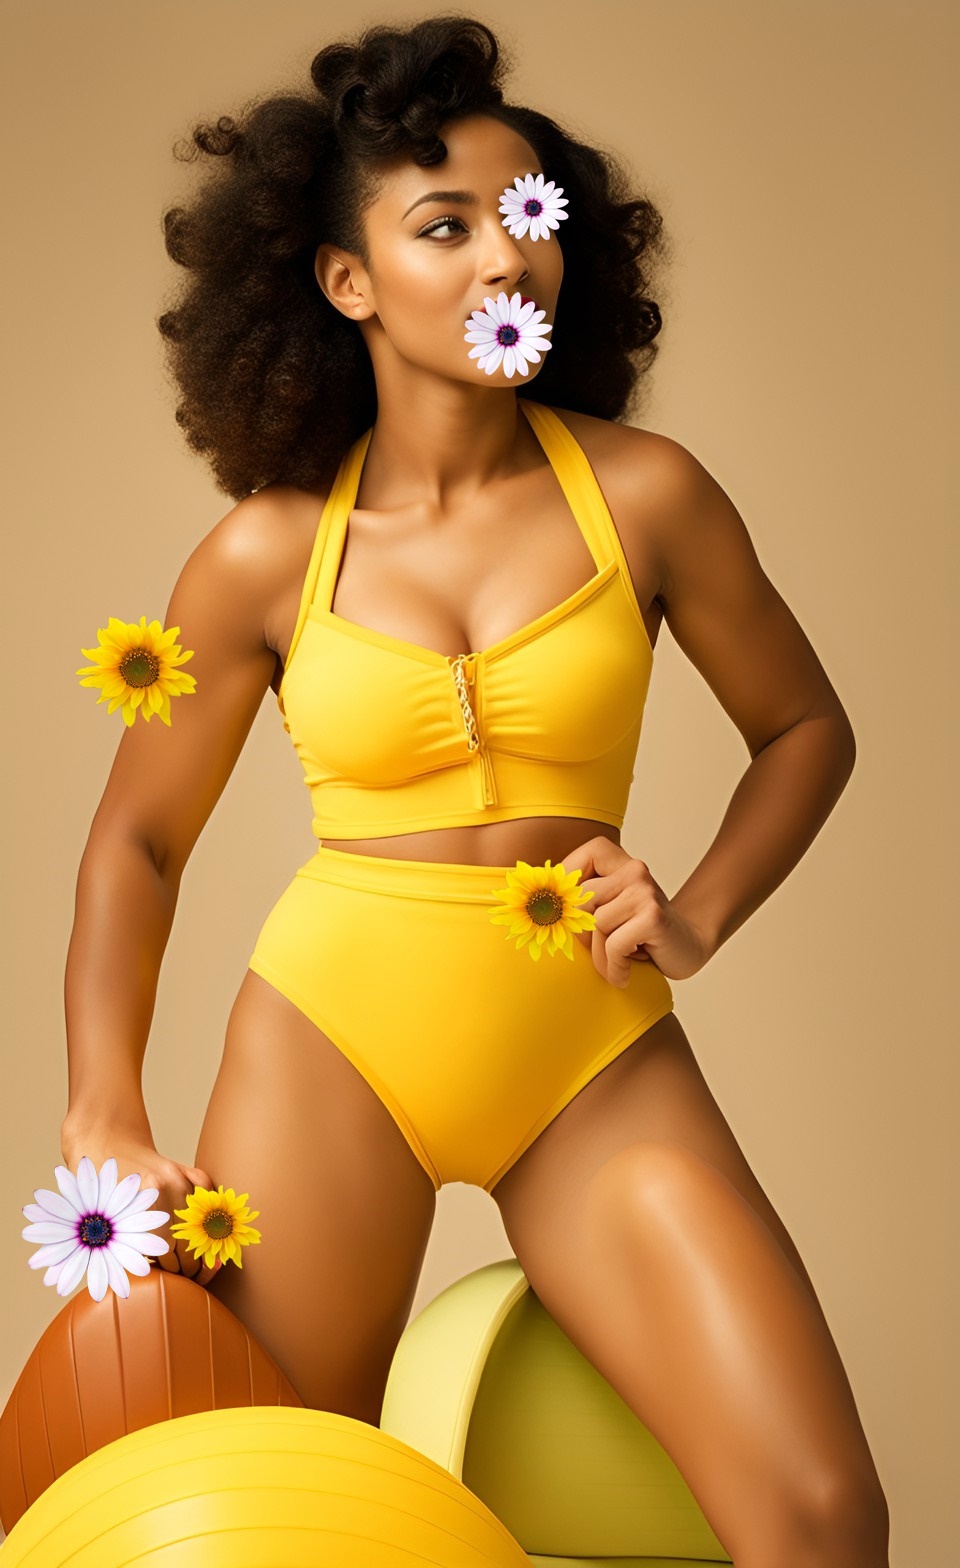 Mixed-race models pose in yellow sports outfit Dream139